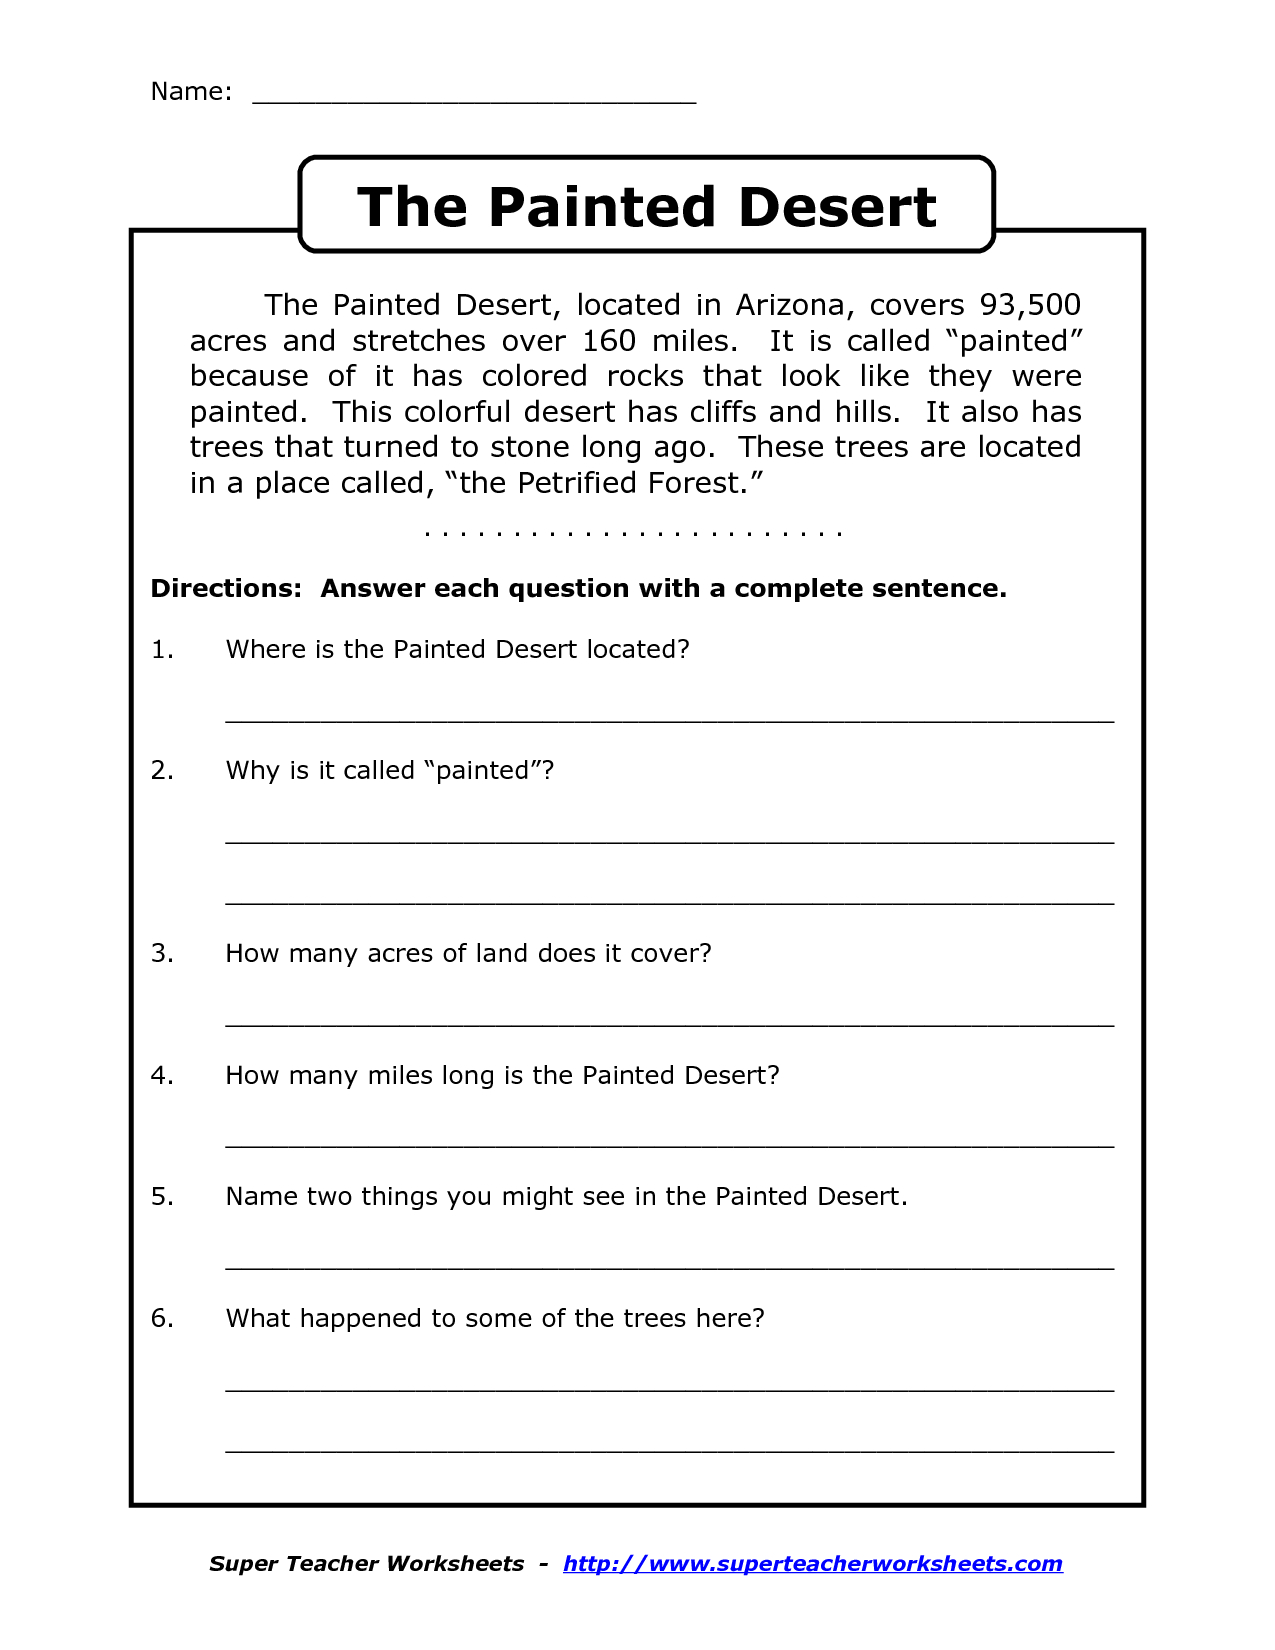 Reading Worksheets For 4Th Grade | Reading Comprehension Worksheets - Free Printable Reading Passages For 3Rd Grade